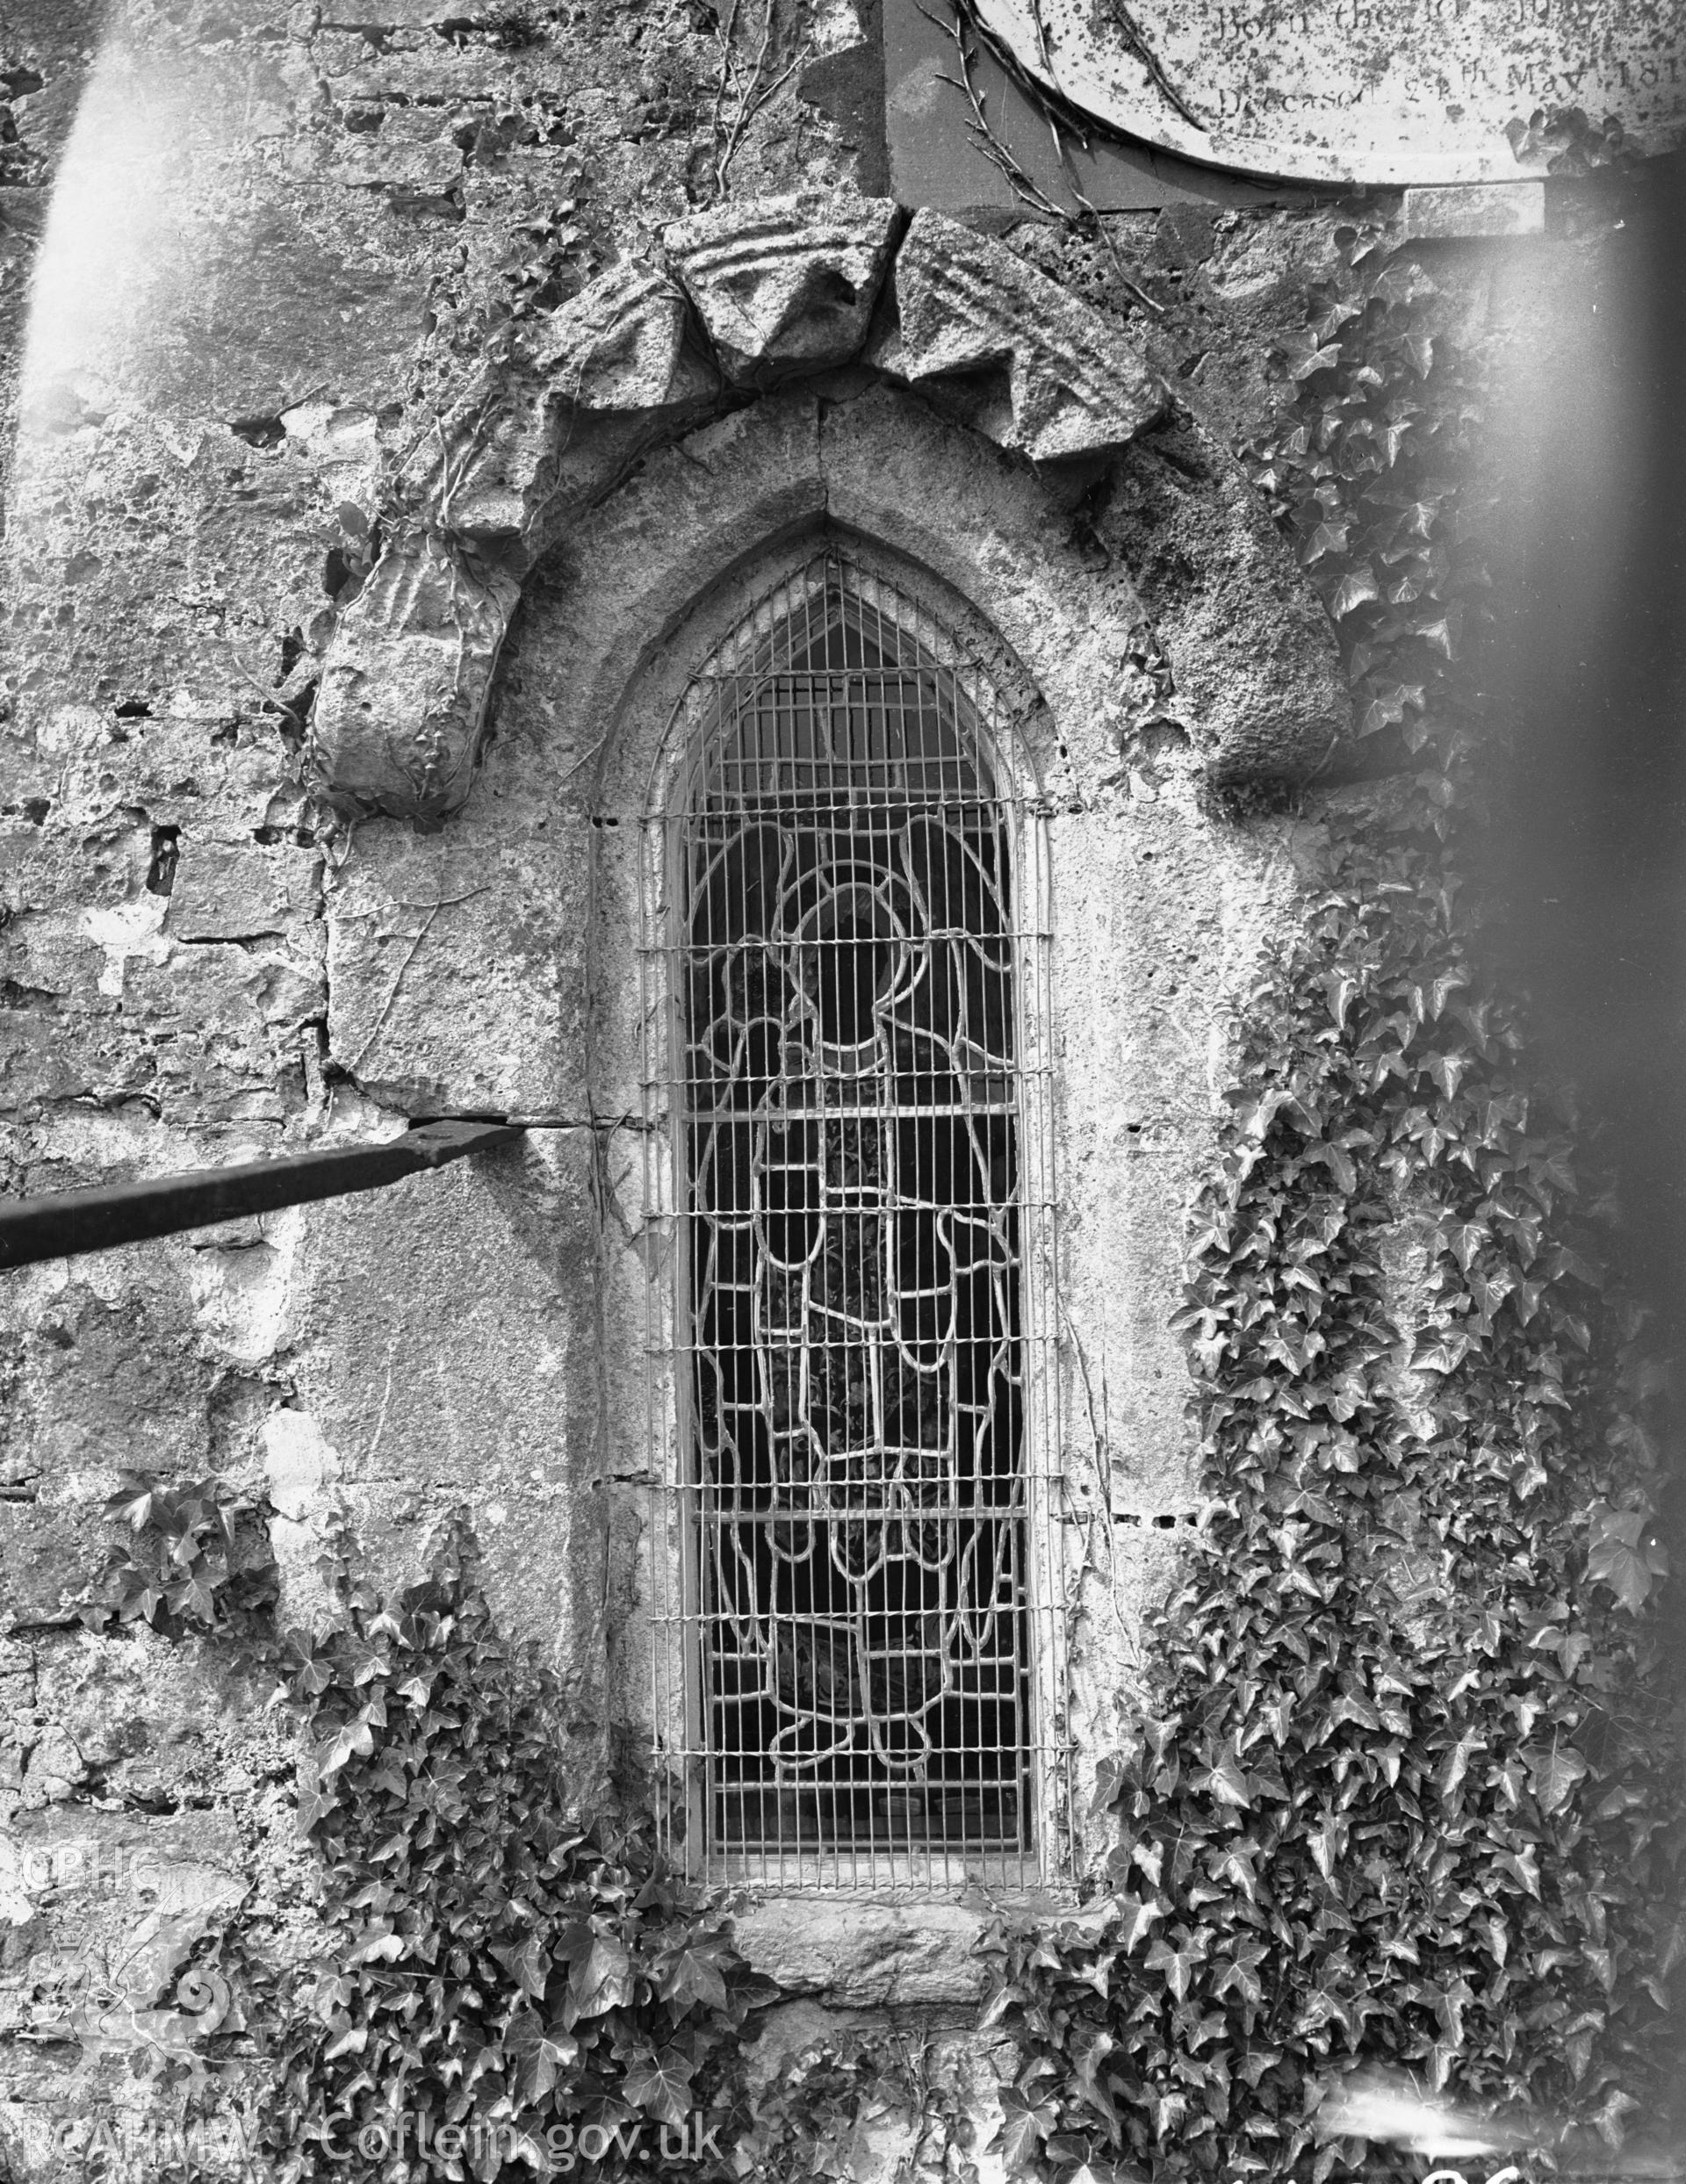 Exterior view showing the south window of the chamcel.